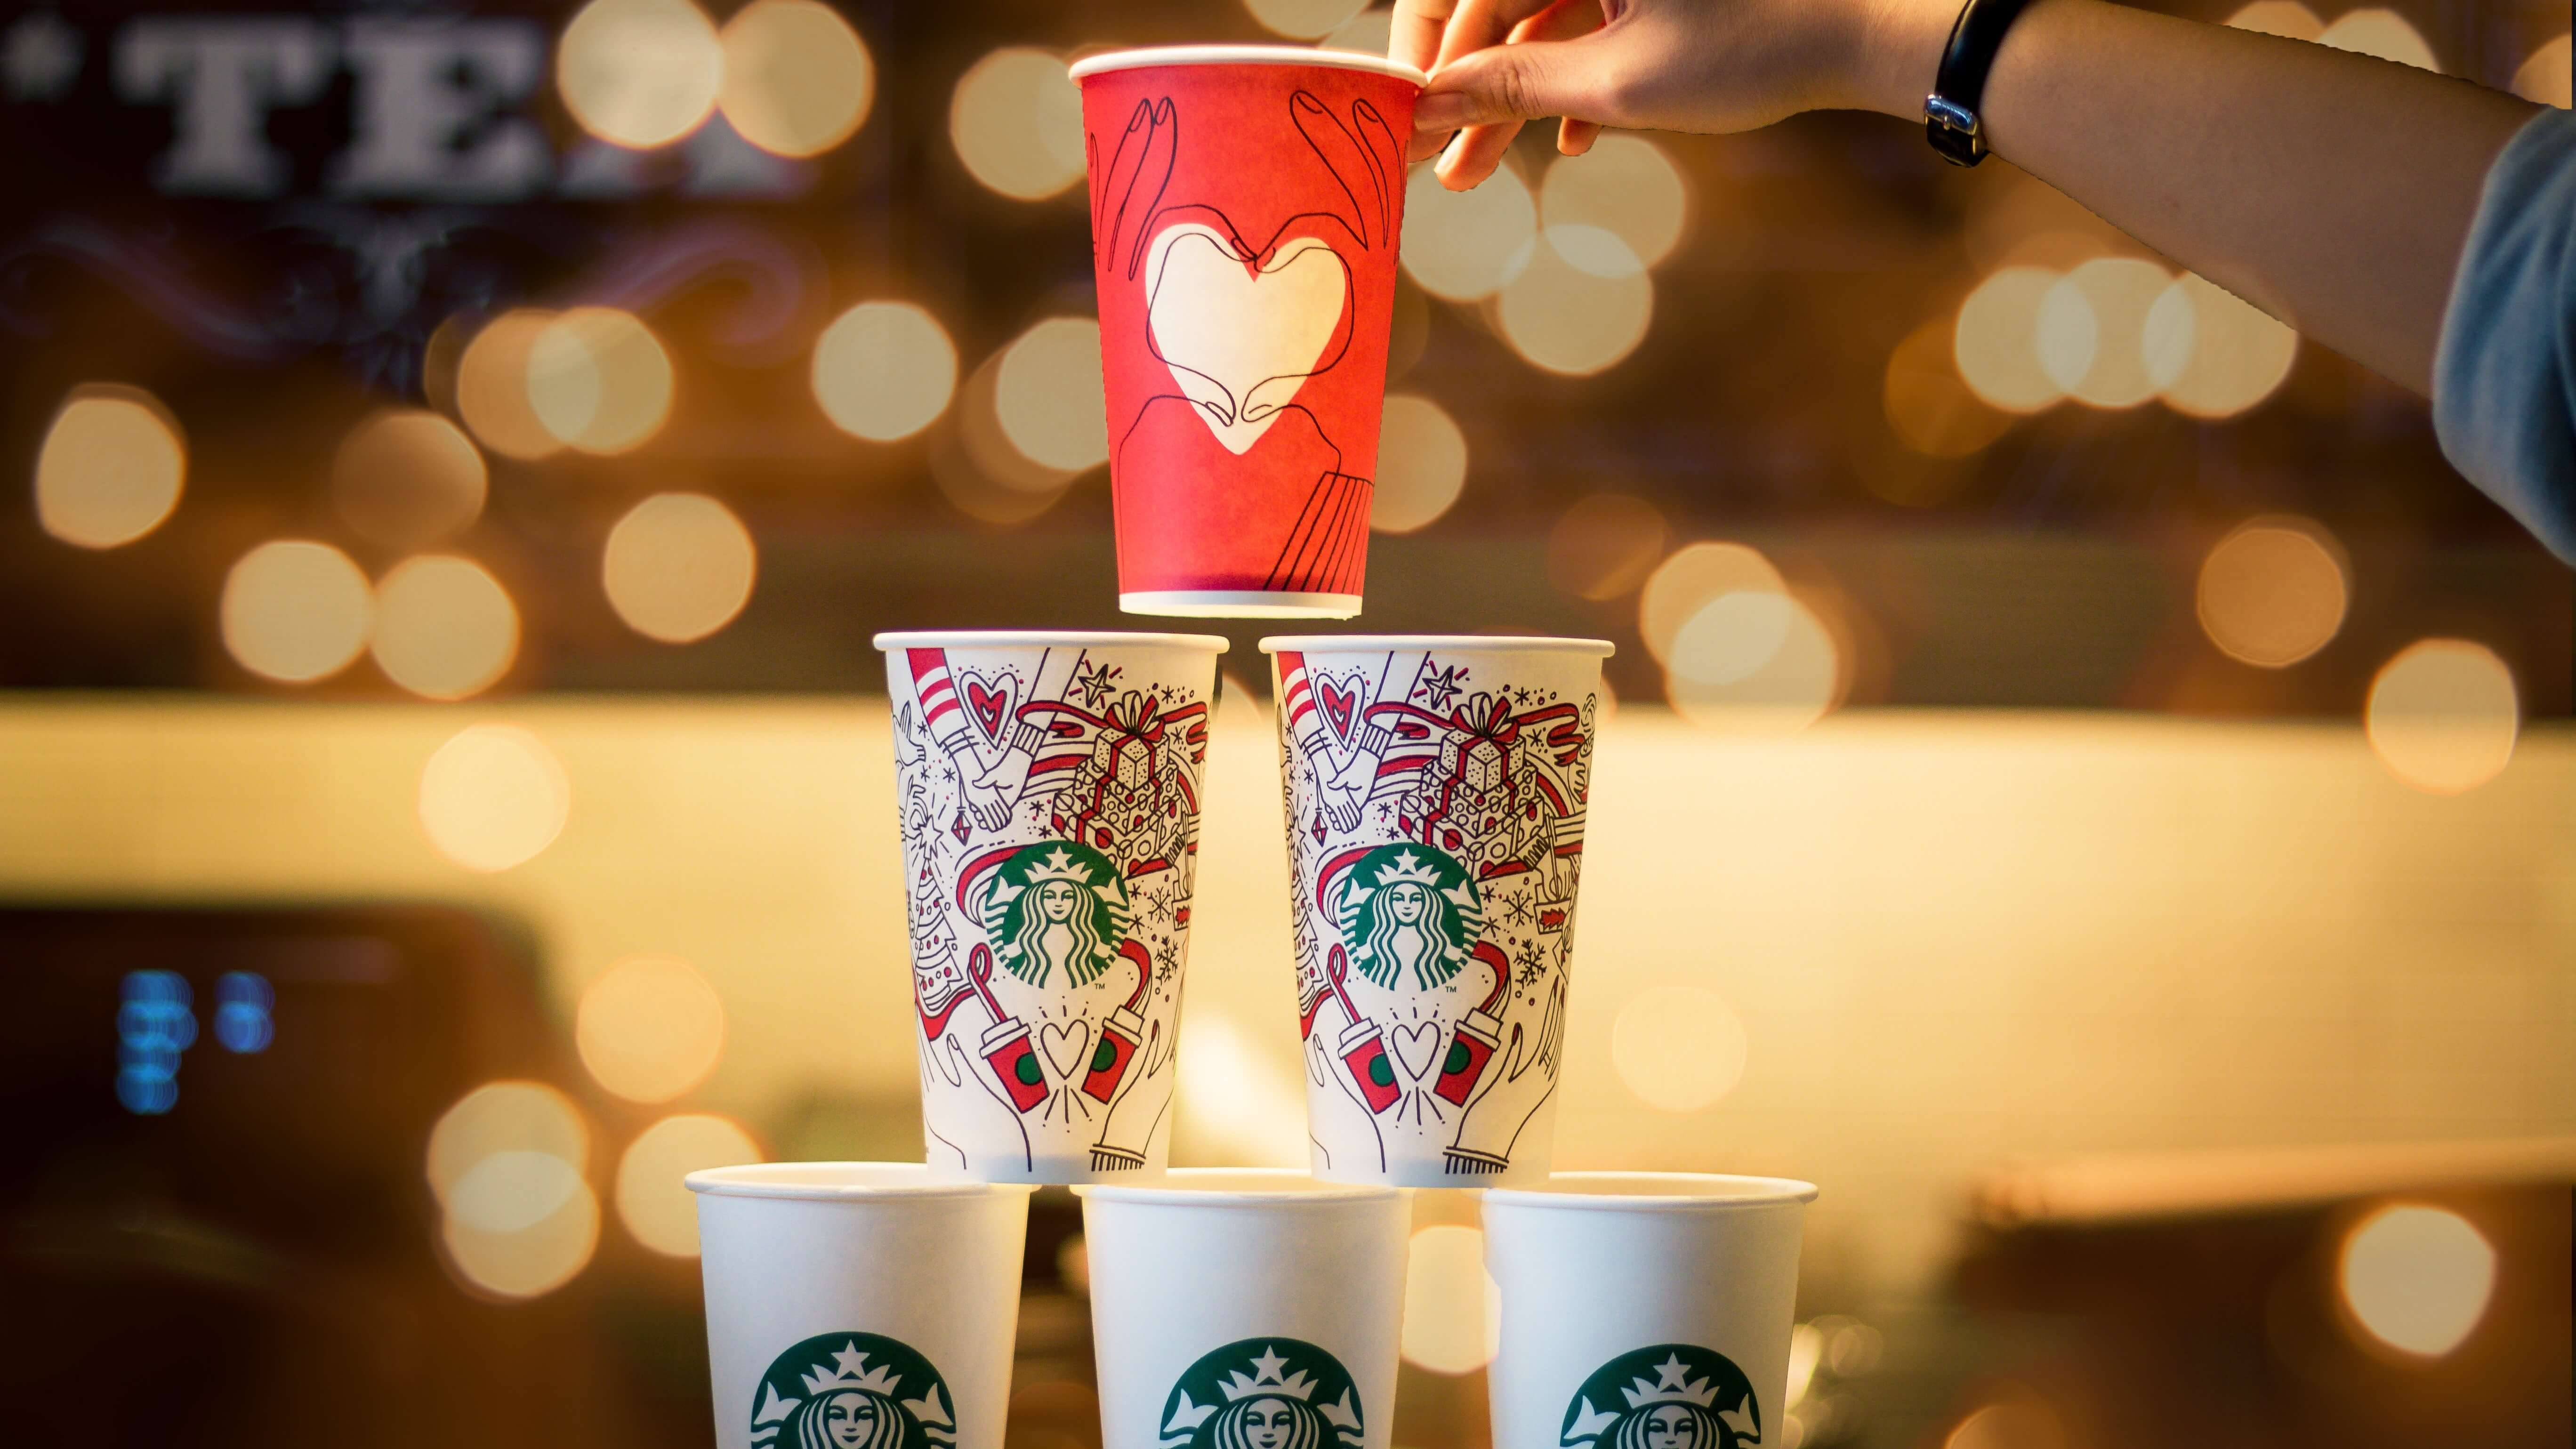 Starbucks Proves That Single-Use Coffee Cups Can Be Recycled